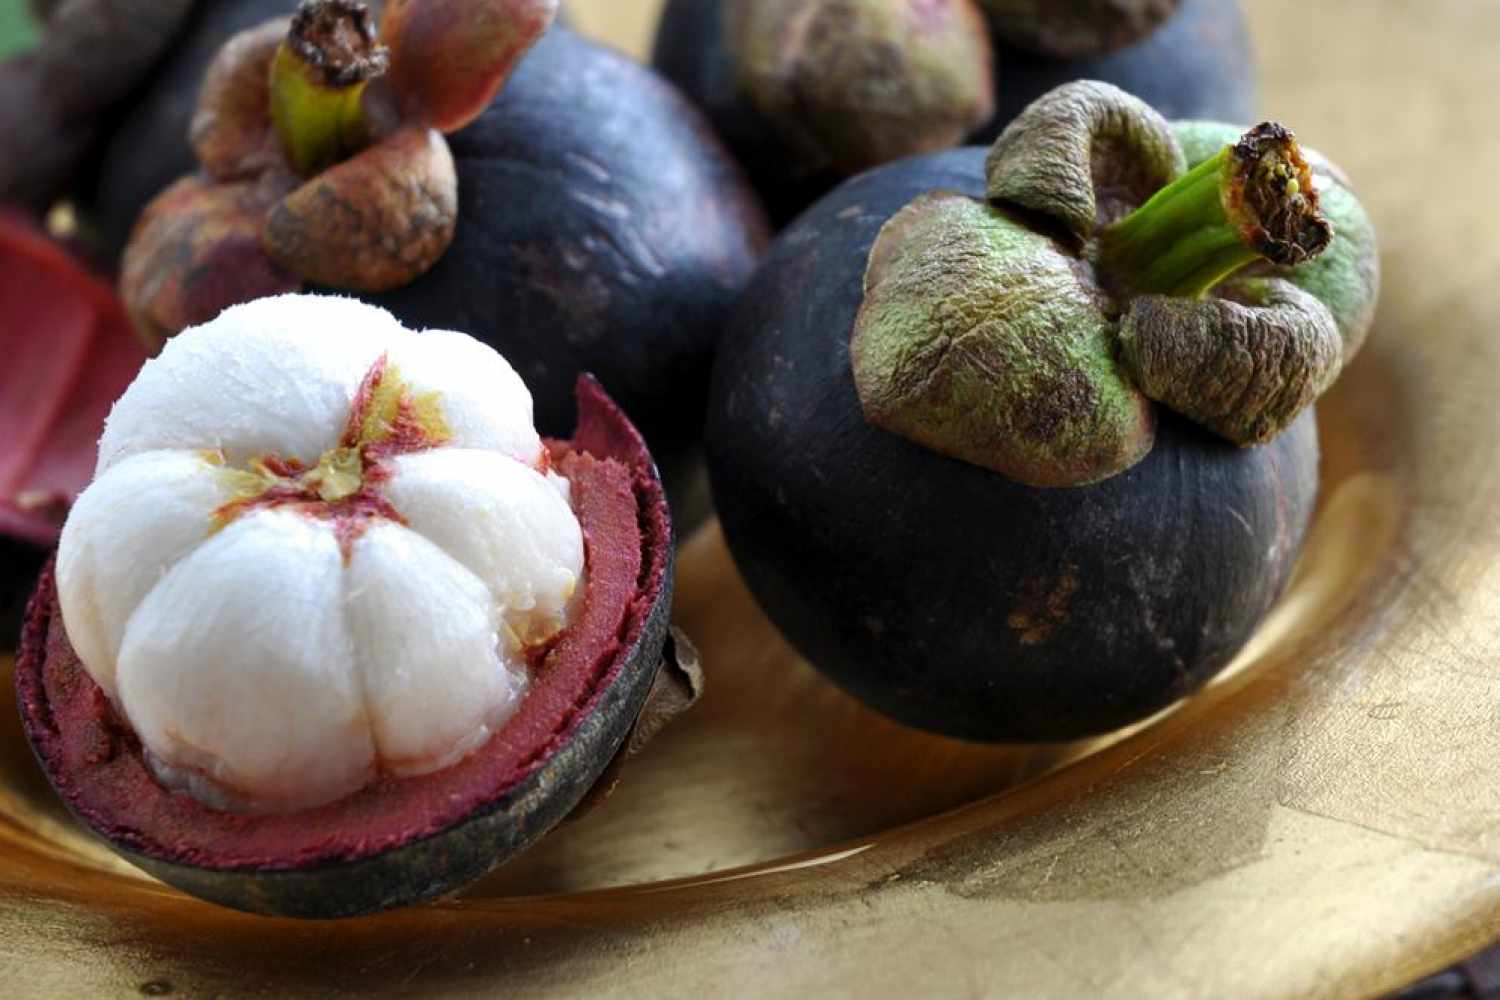 Mangosteen: Are They Truly Beneficial for Your Health?